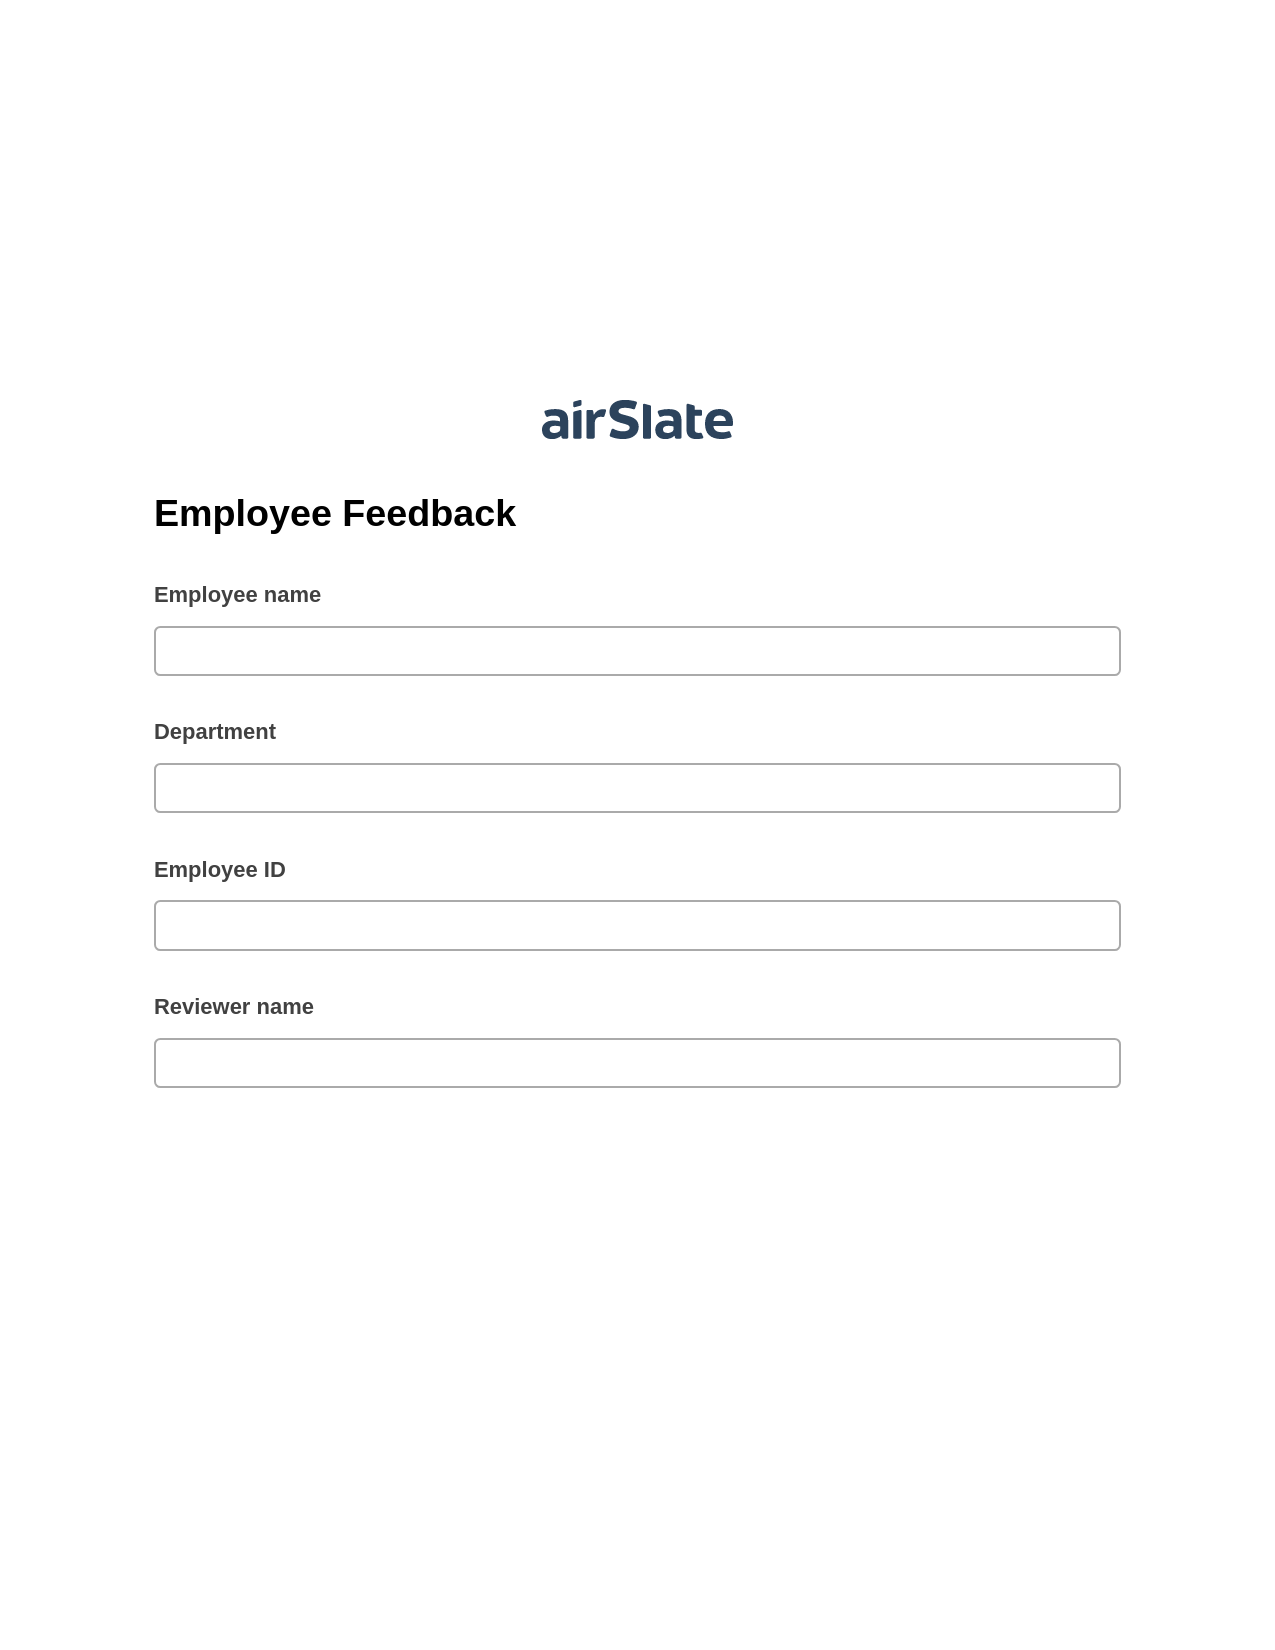 Multirole Employee Feedback Pre-fill from CSV File Dropdown Options Bot, Remove Slate Bot, Export to NetSuite Record Bot